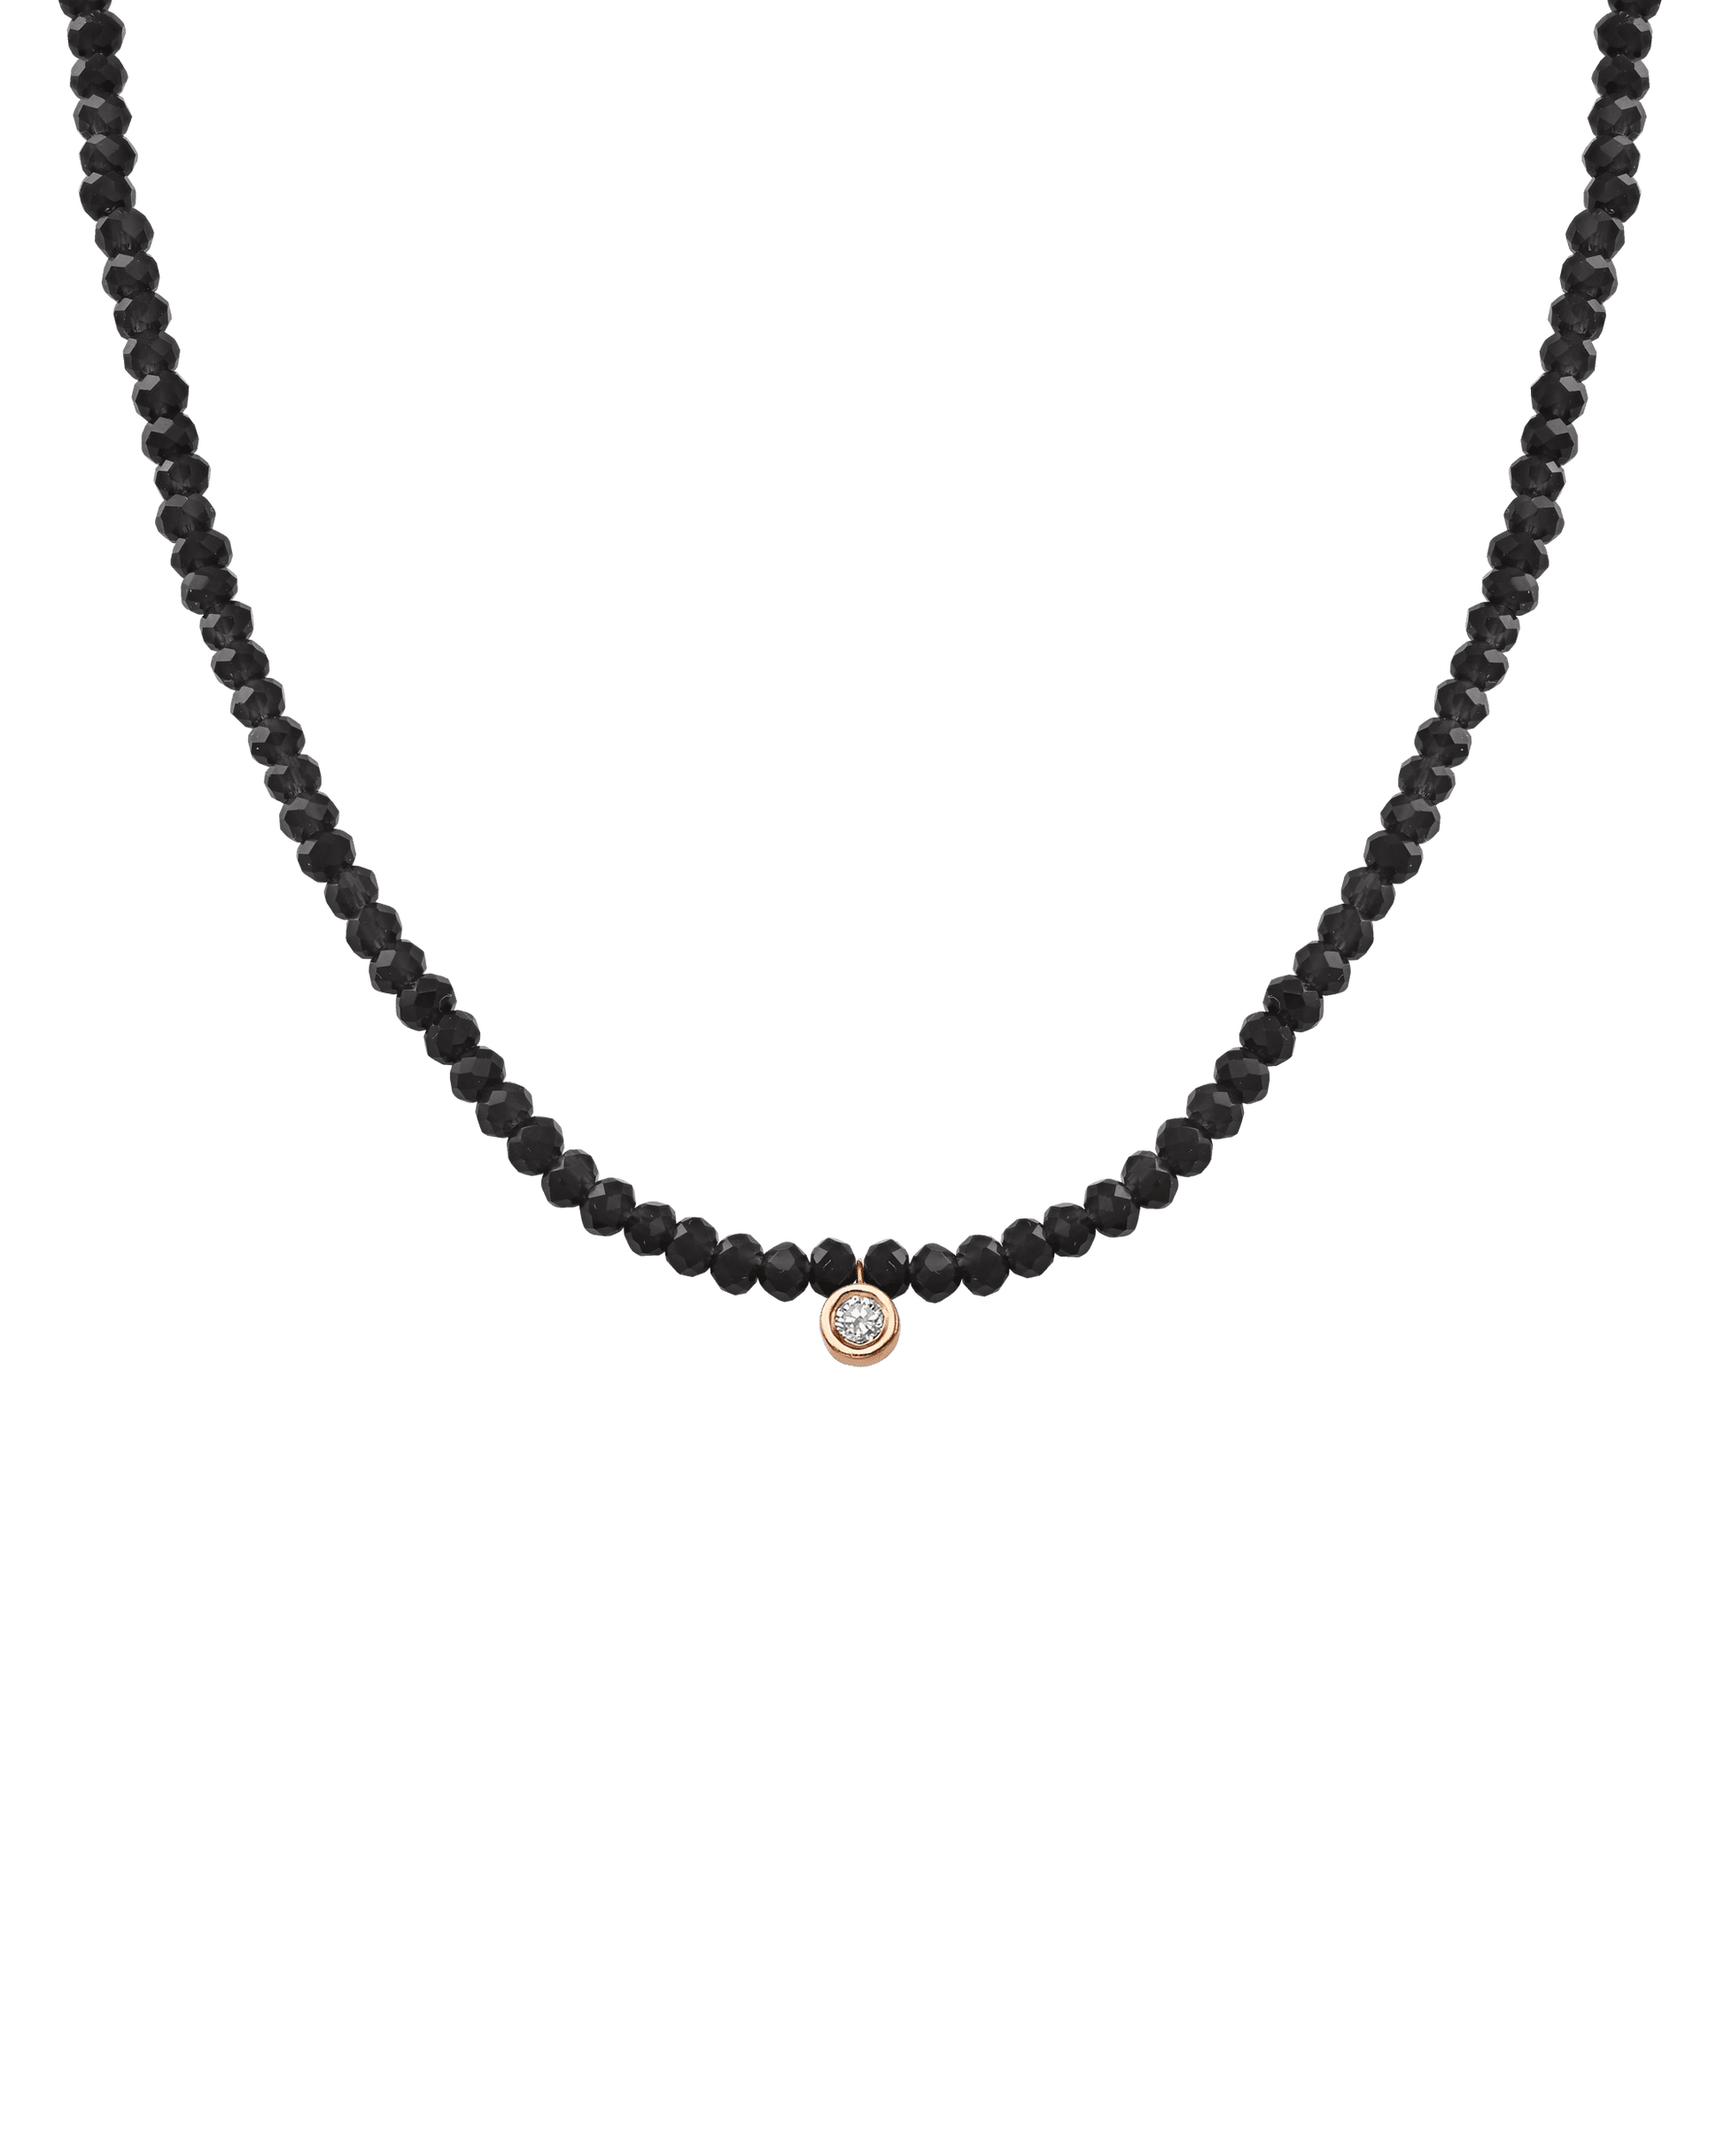 The Gemstone & Diamond Necklace - 14K Rose Gold Necklaces 14K Solid Gold Glass Beads Black Spinnel Medium: 0.04ct 14"